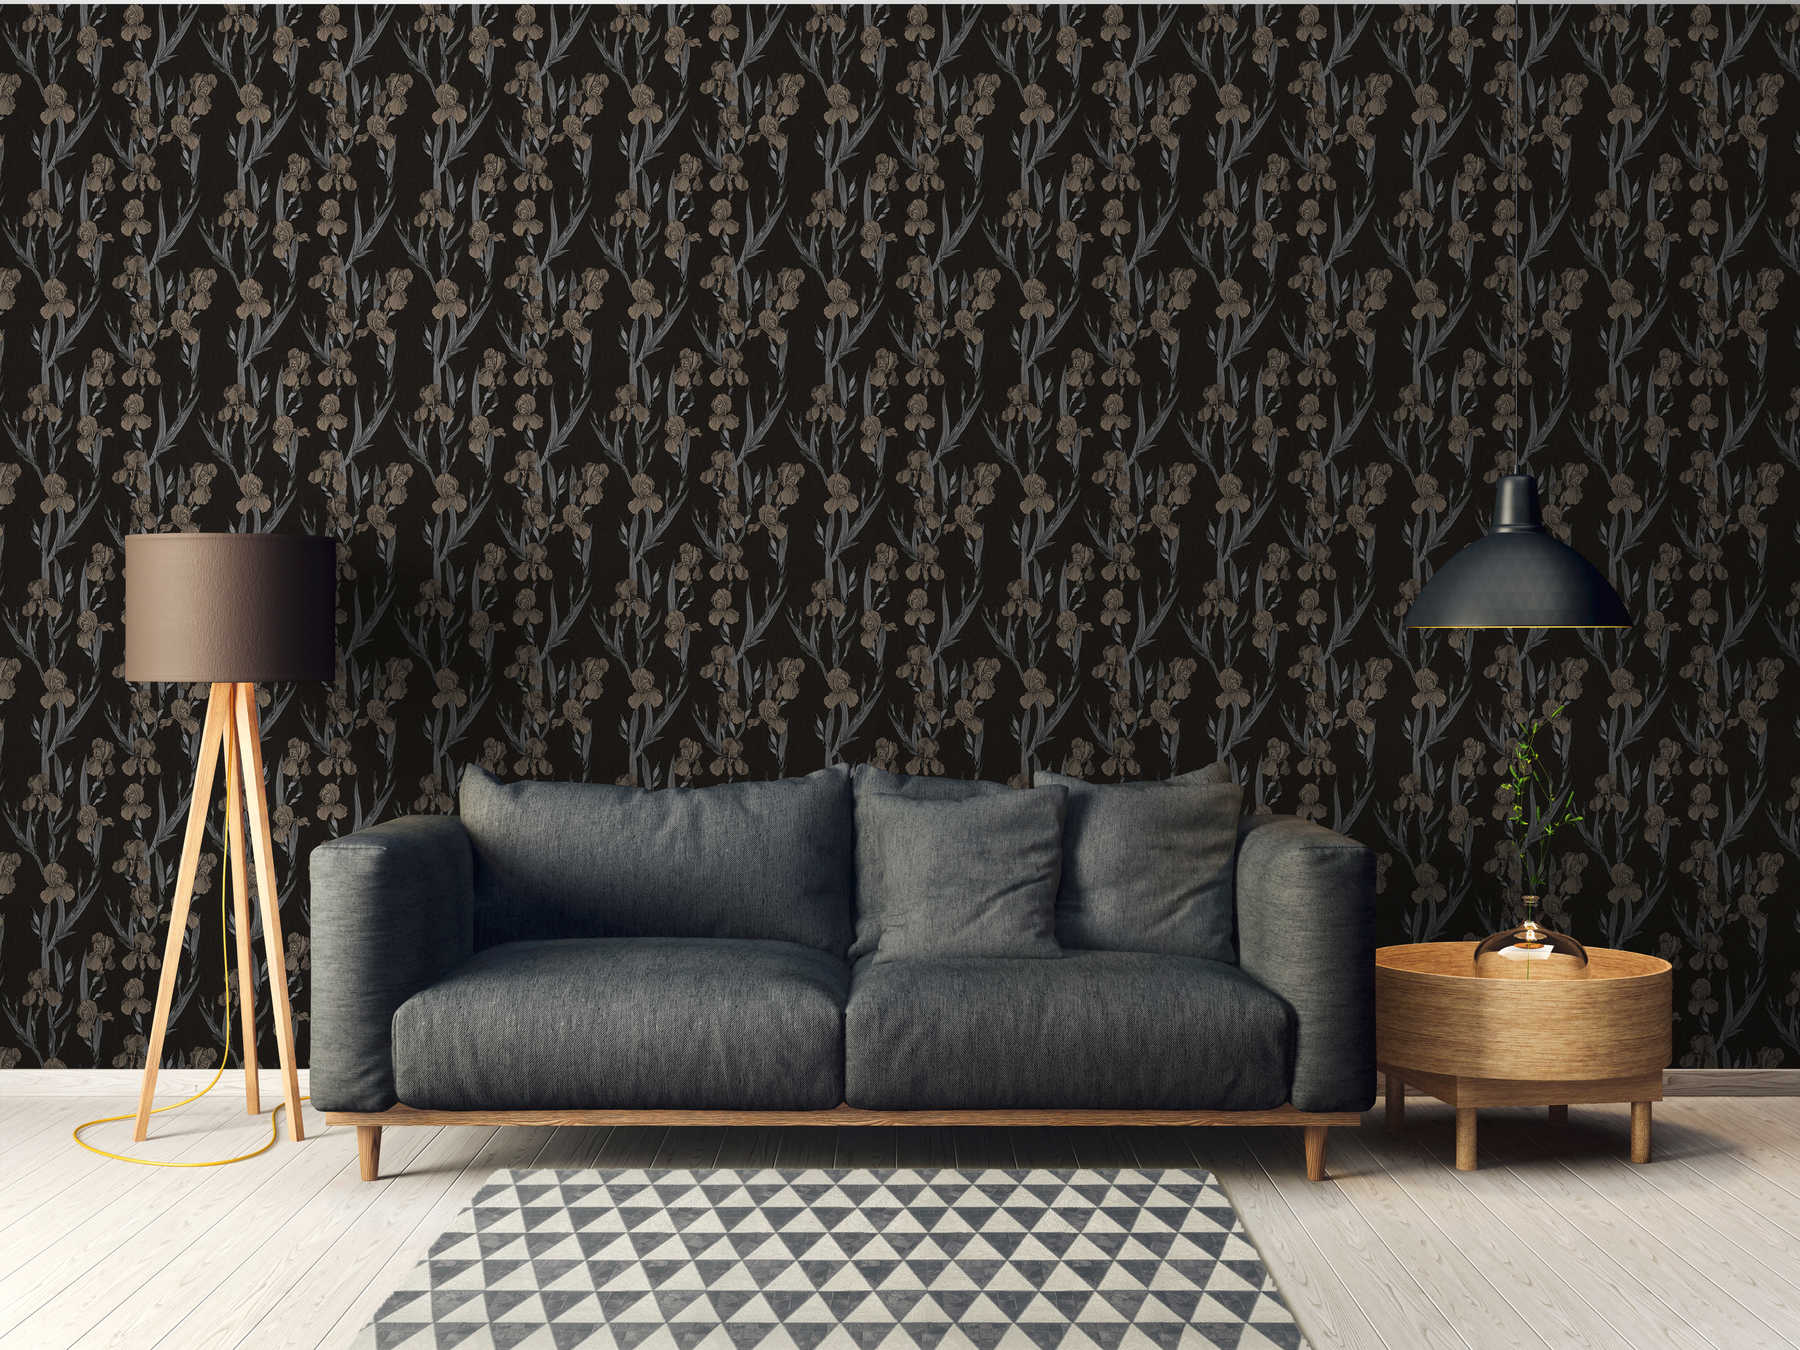             Floral pattern wallpaper with flowers in drawing style - black, grey, brown
        